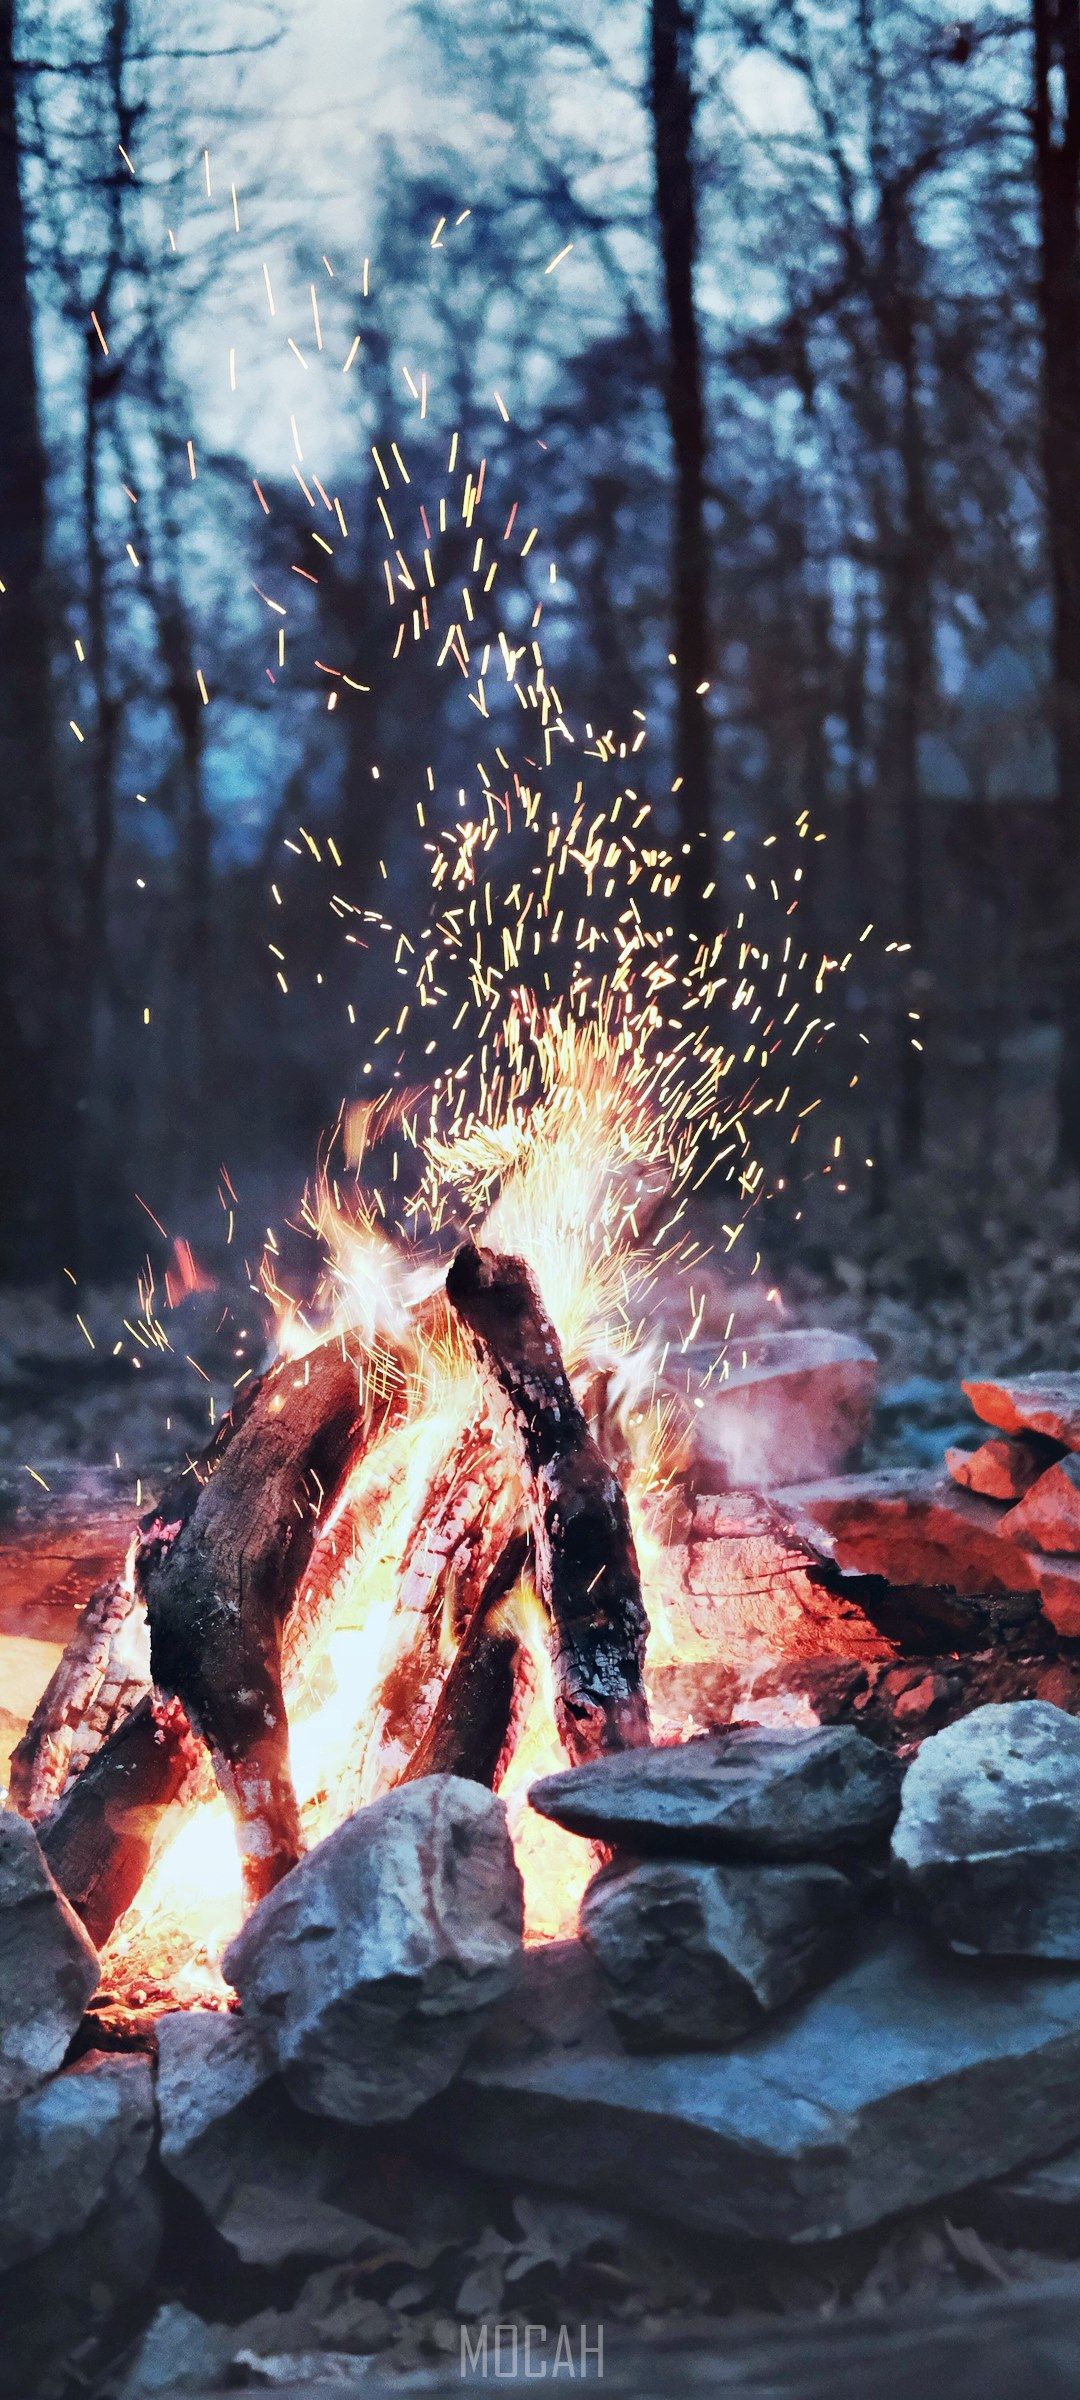 A bonfire in the woods with sparks flying - Camping